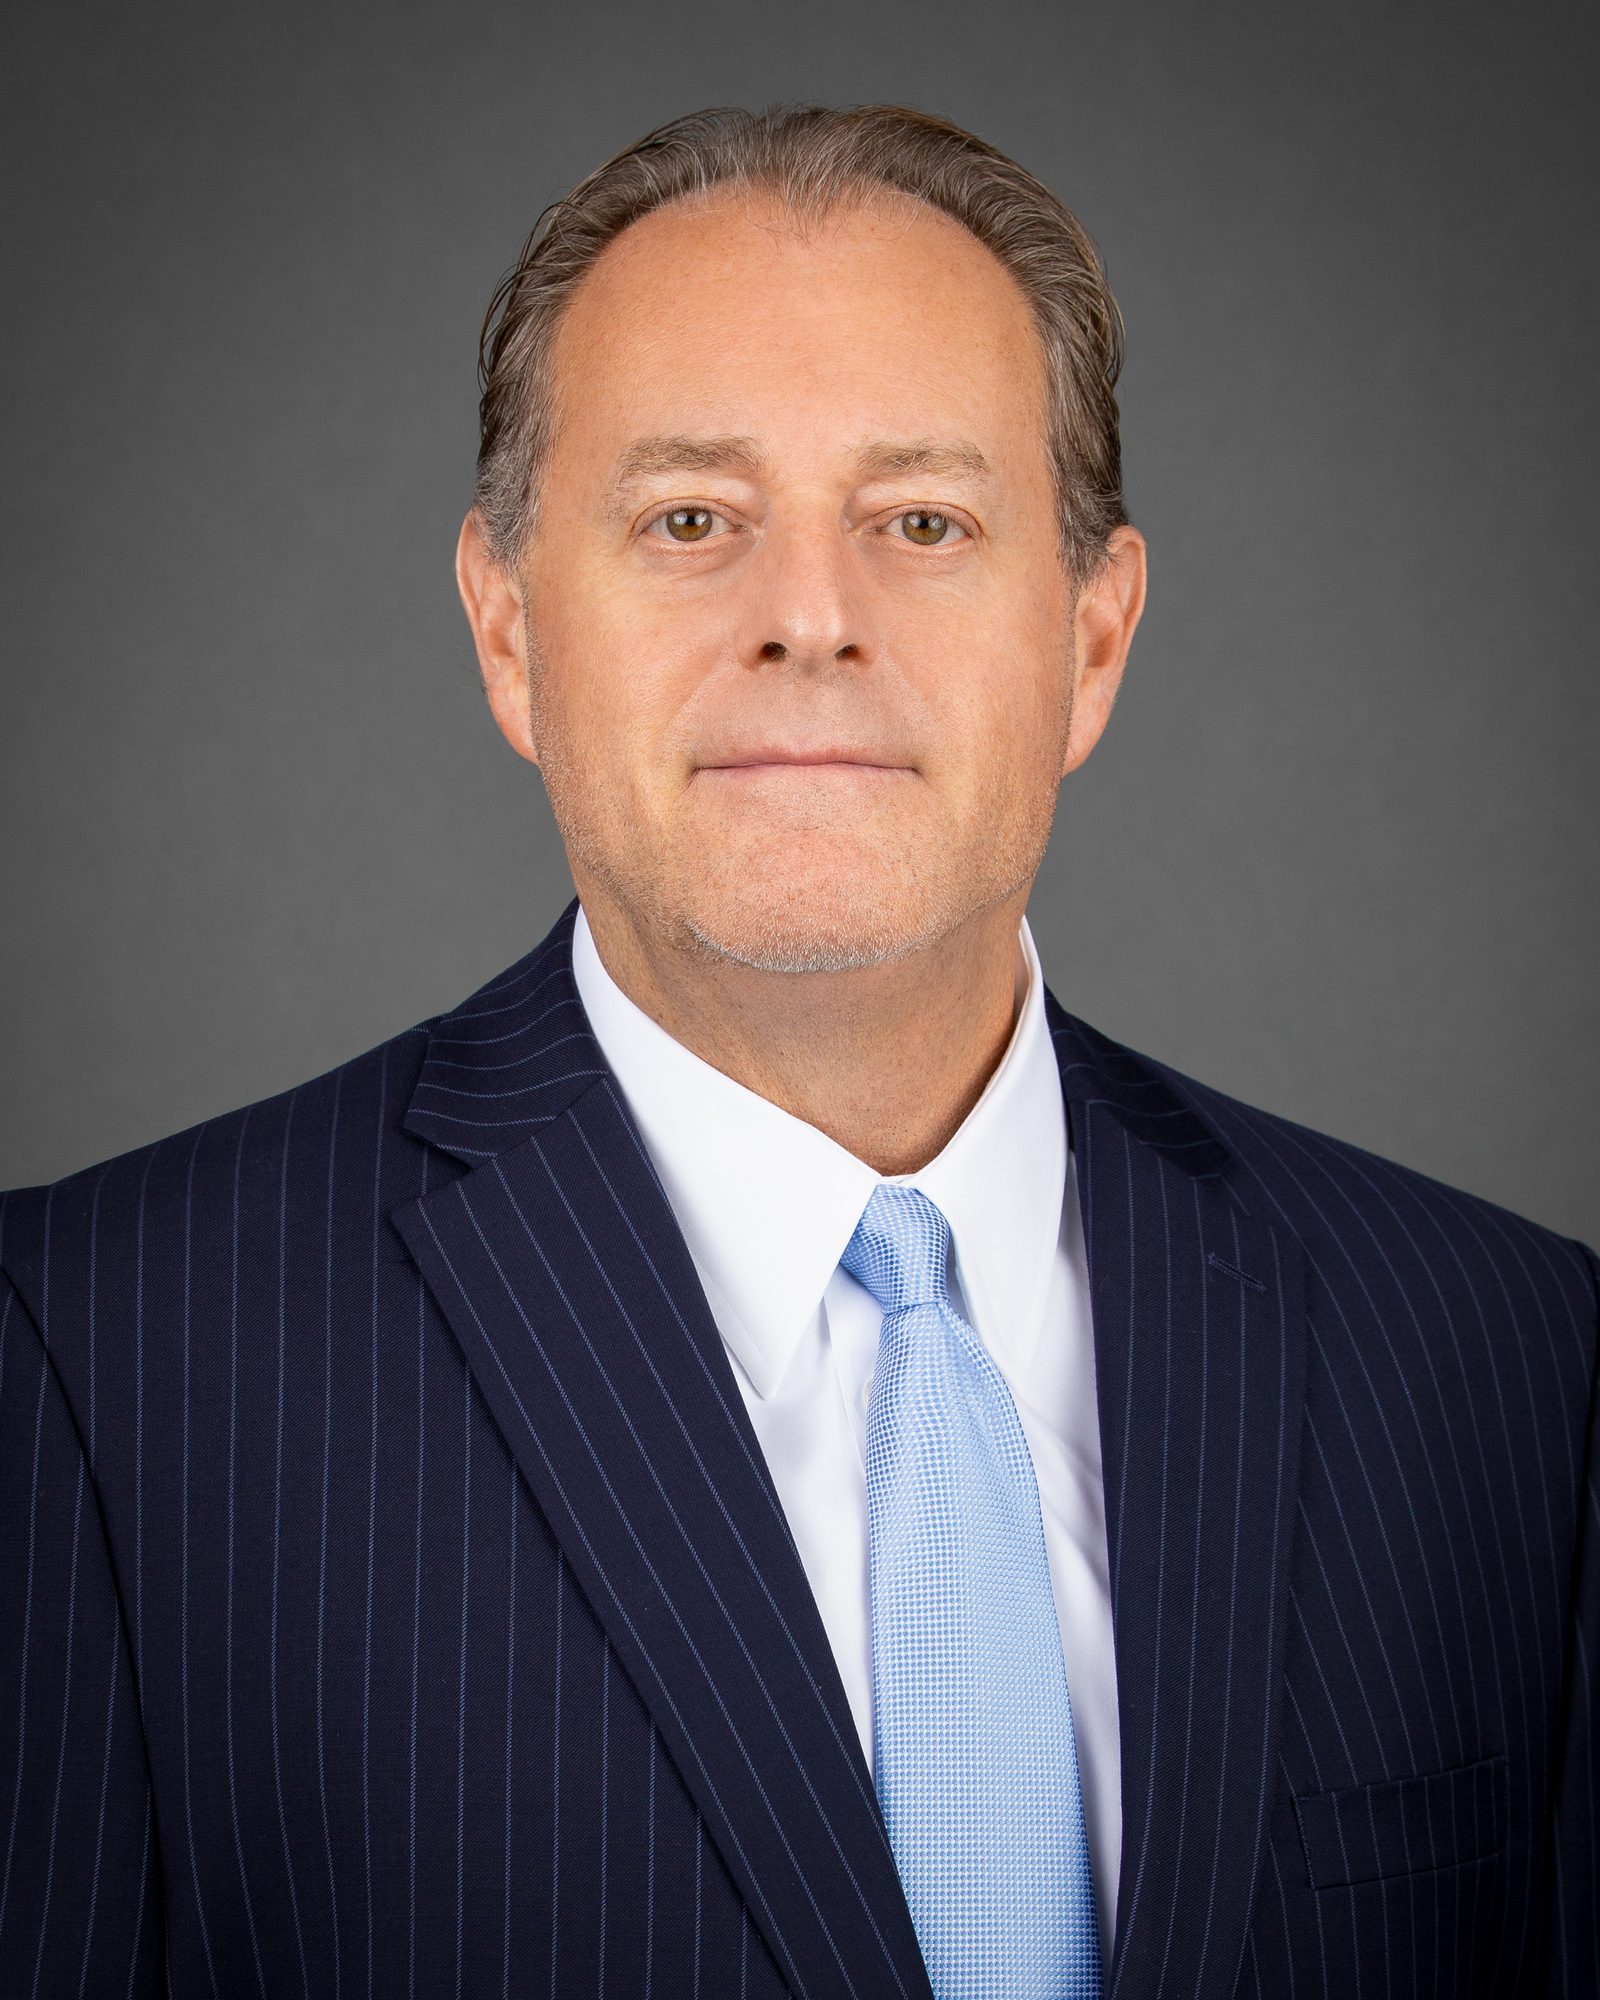 Bank of America Private Client Advisor Alan Epperson